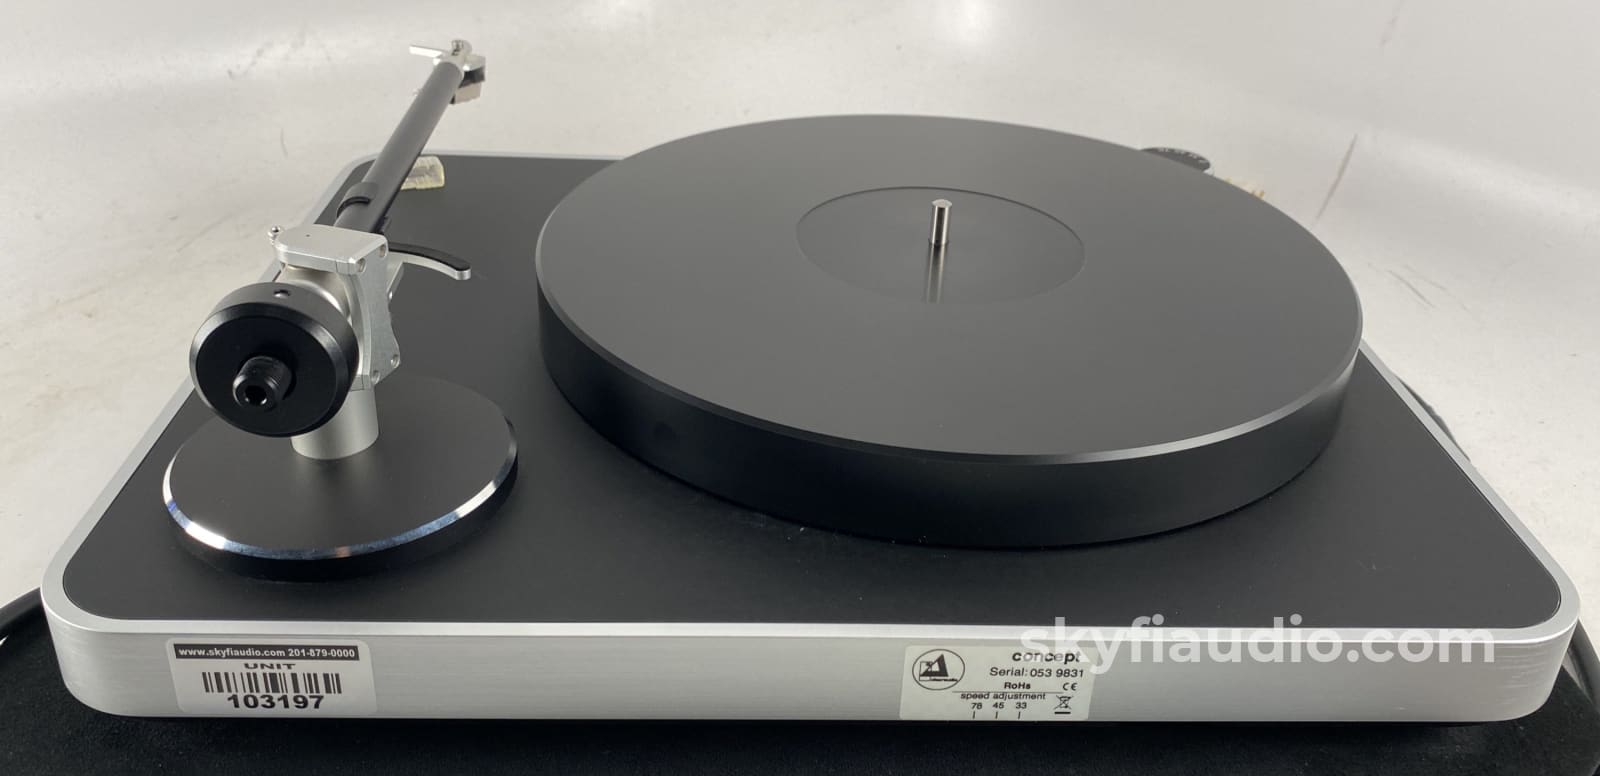 Clearaudio Concept Turntable With Upgraded Virtuoso Phono Cartridge